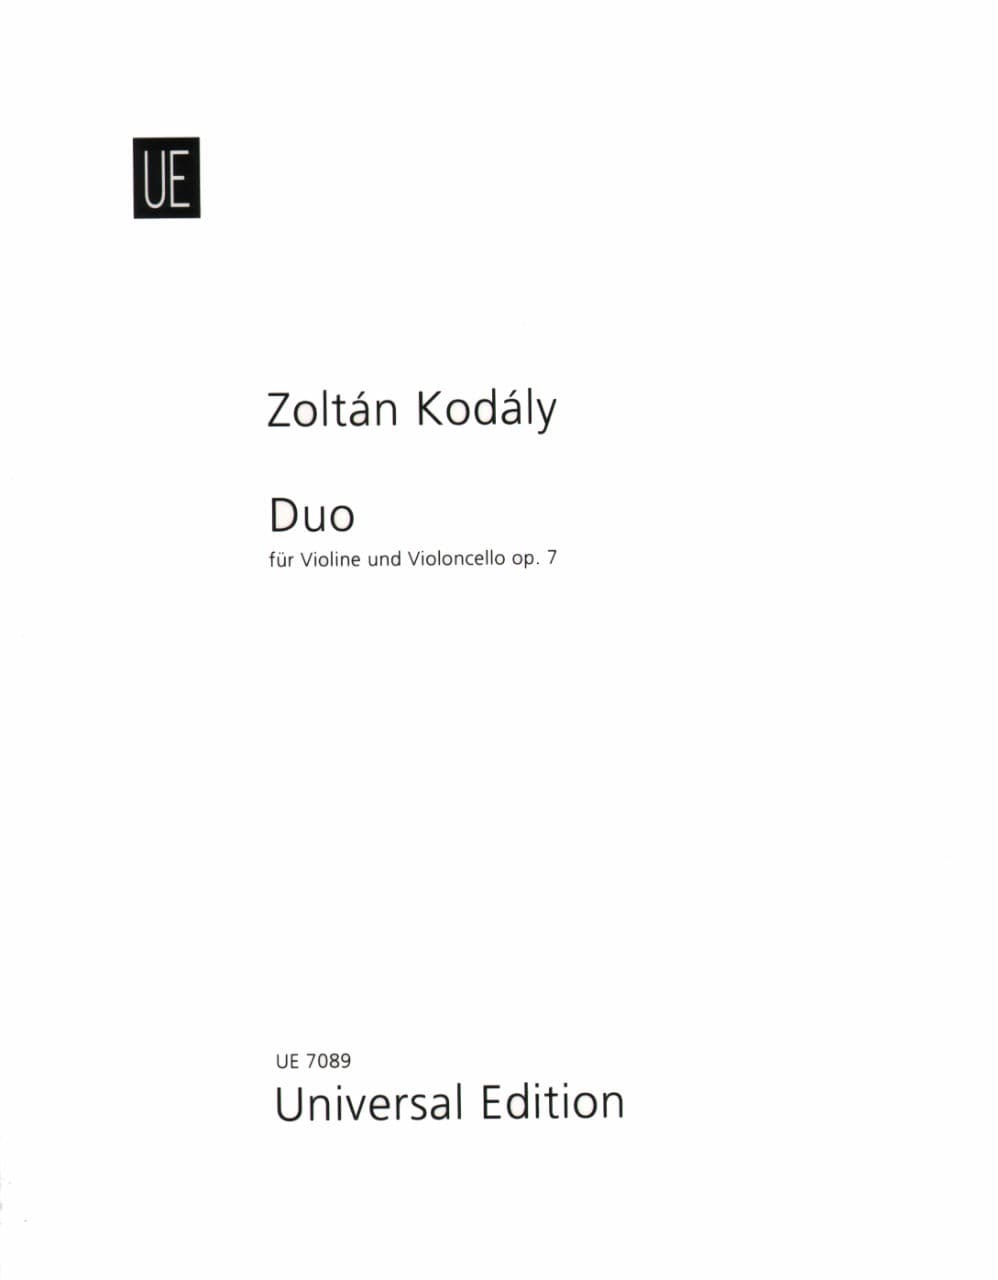 Kodály, Zoltán - Duo, Op 7 (1914) - Violin and Cello - Universal Edition